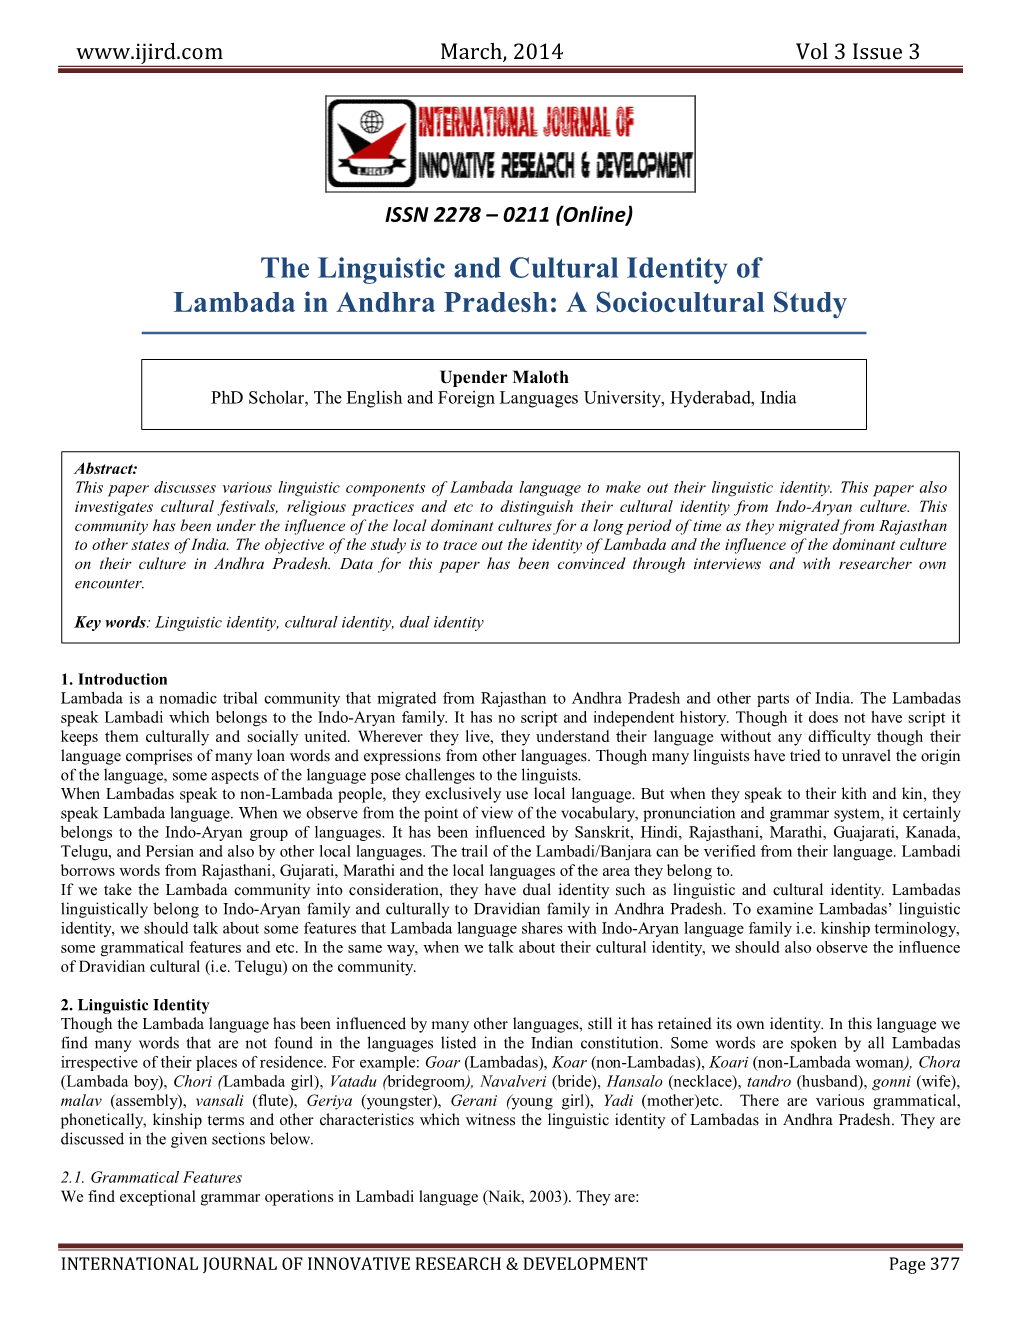 The Linguistic and Cultural Identity of Lambada in Andhra Pradesh: a Sociocultural Study